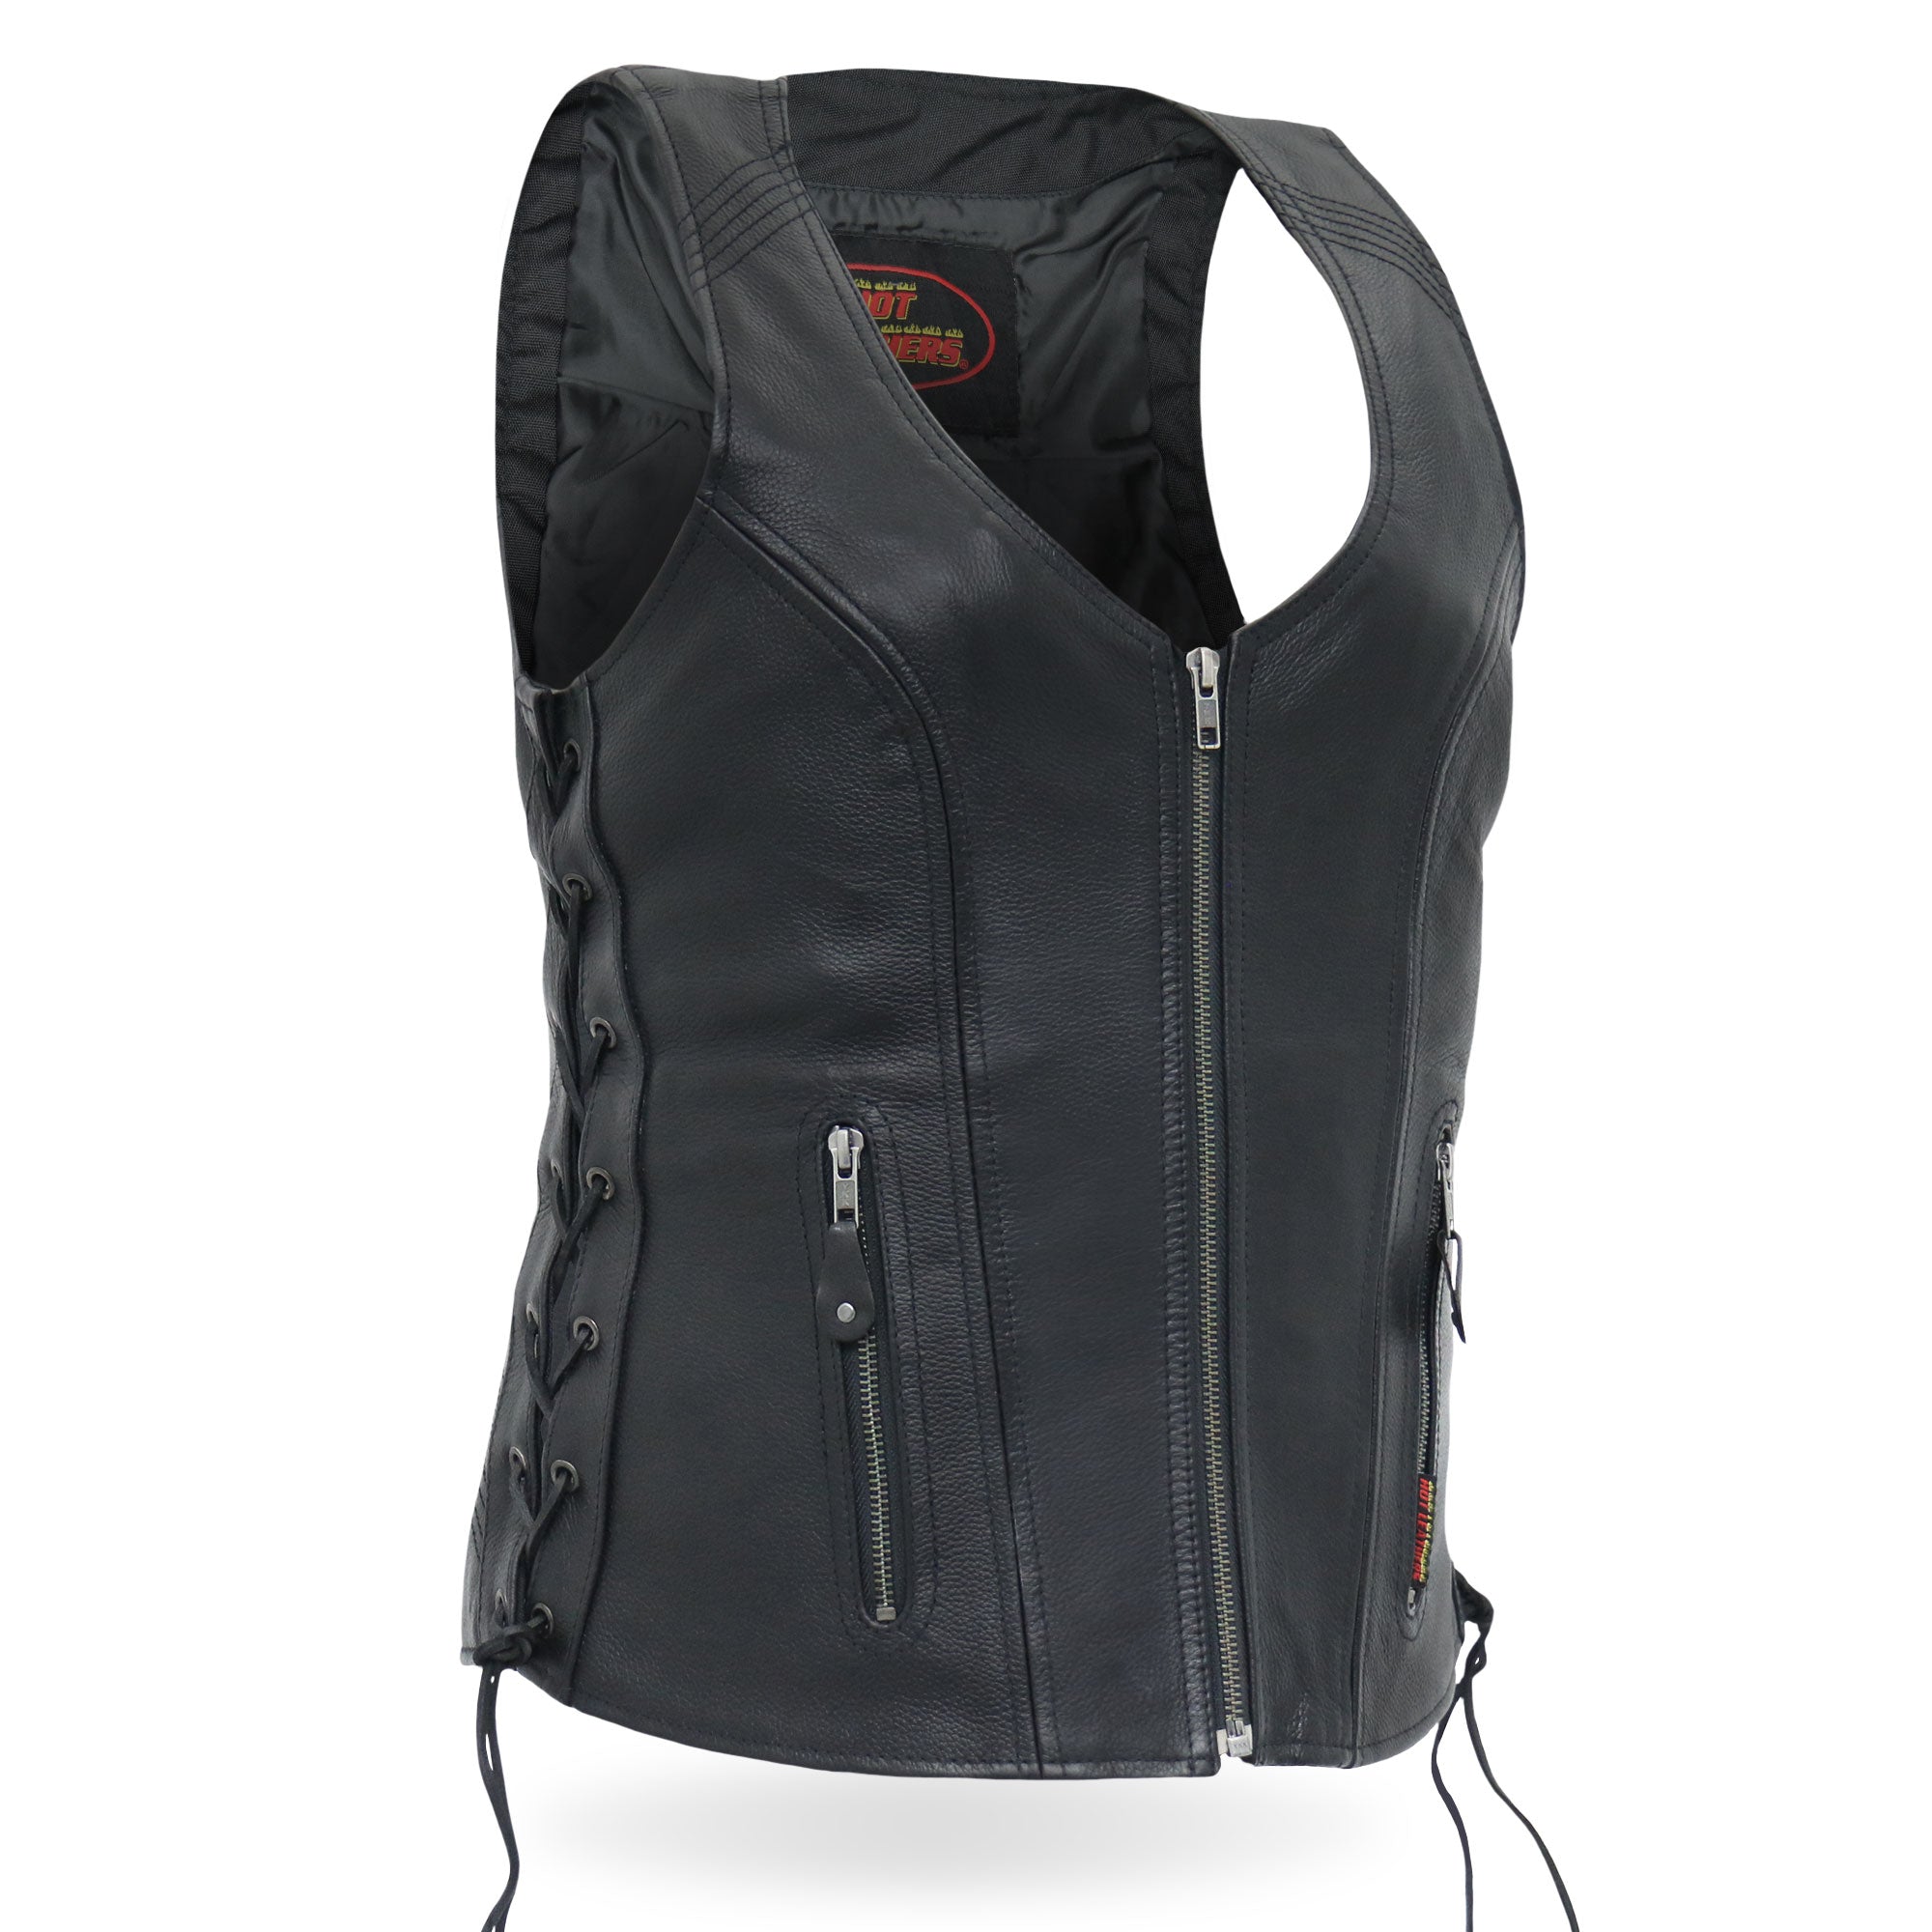 High-Quality Harley Davidson Sleeveless Motorcycle Cowhide Leather